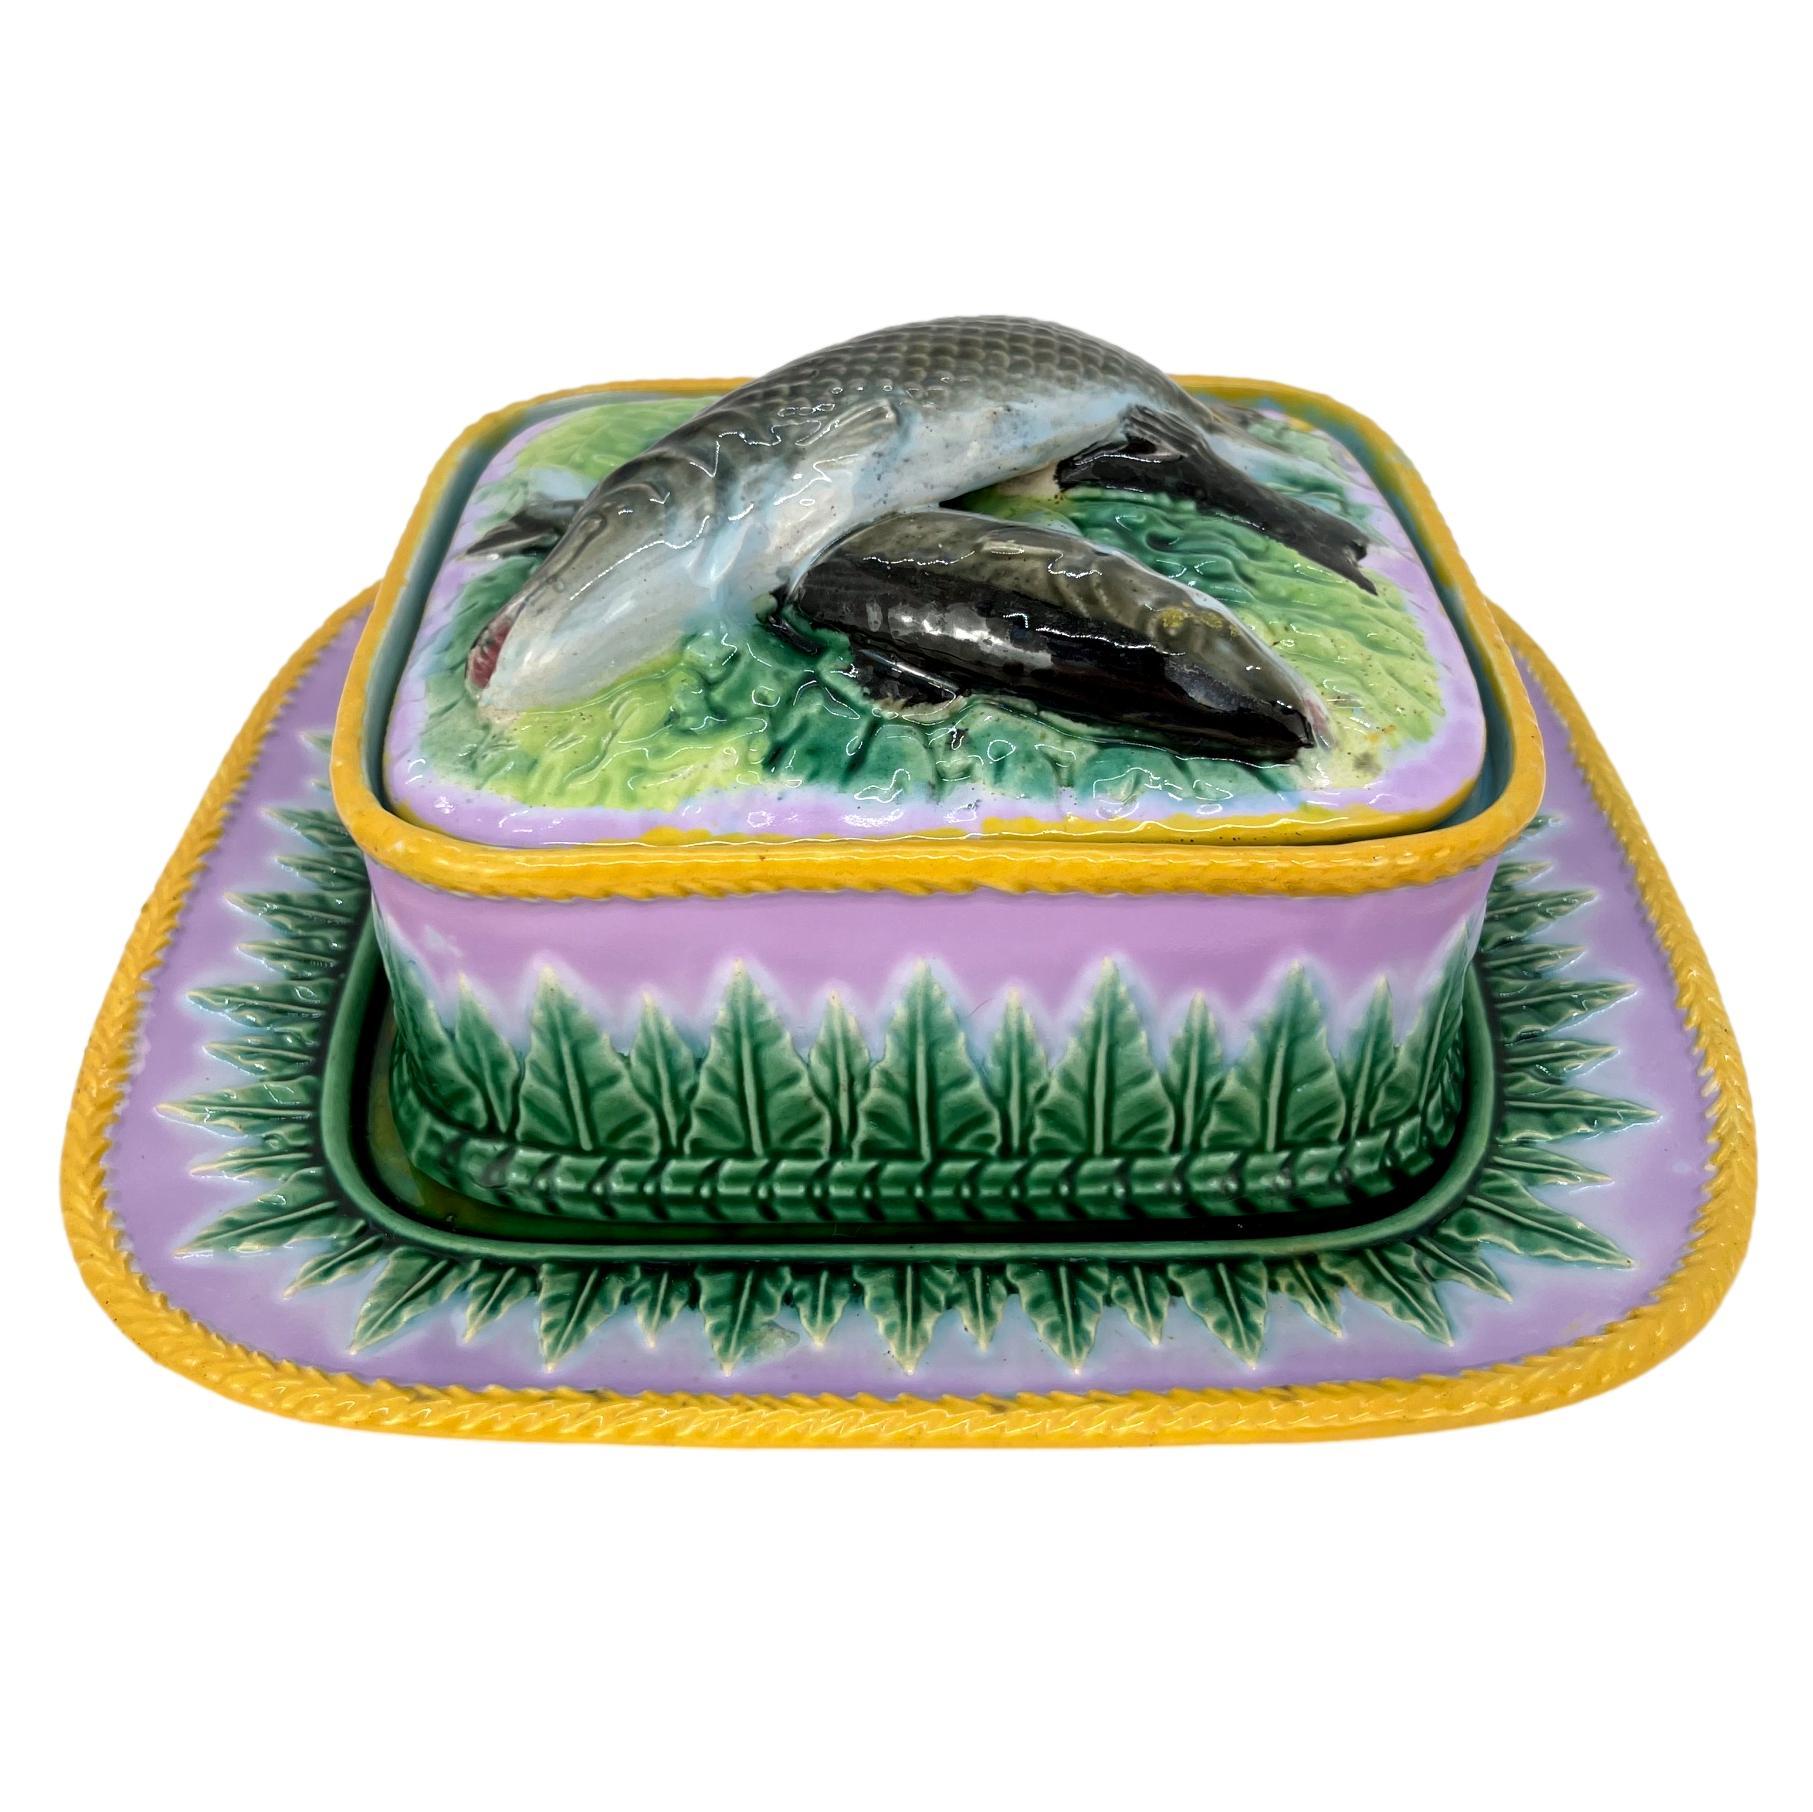 George Jones Majolica Sardine box on pink ground, English, ca. 1866, the box molded with green acanthus leaves on a pink ground, with matching underplate, the lid molded in high relief with three sardines, the top one forming the knop, with